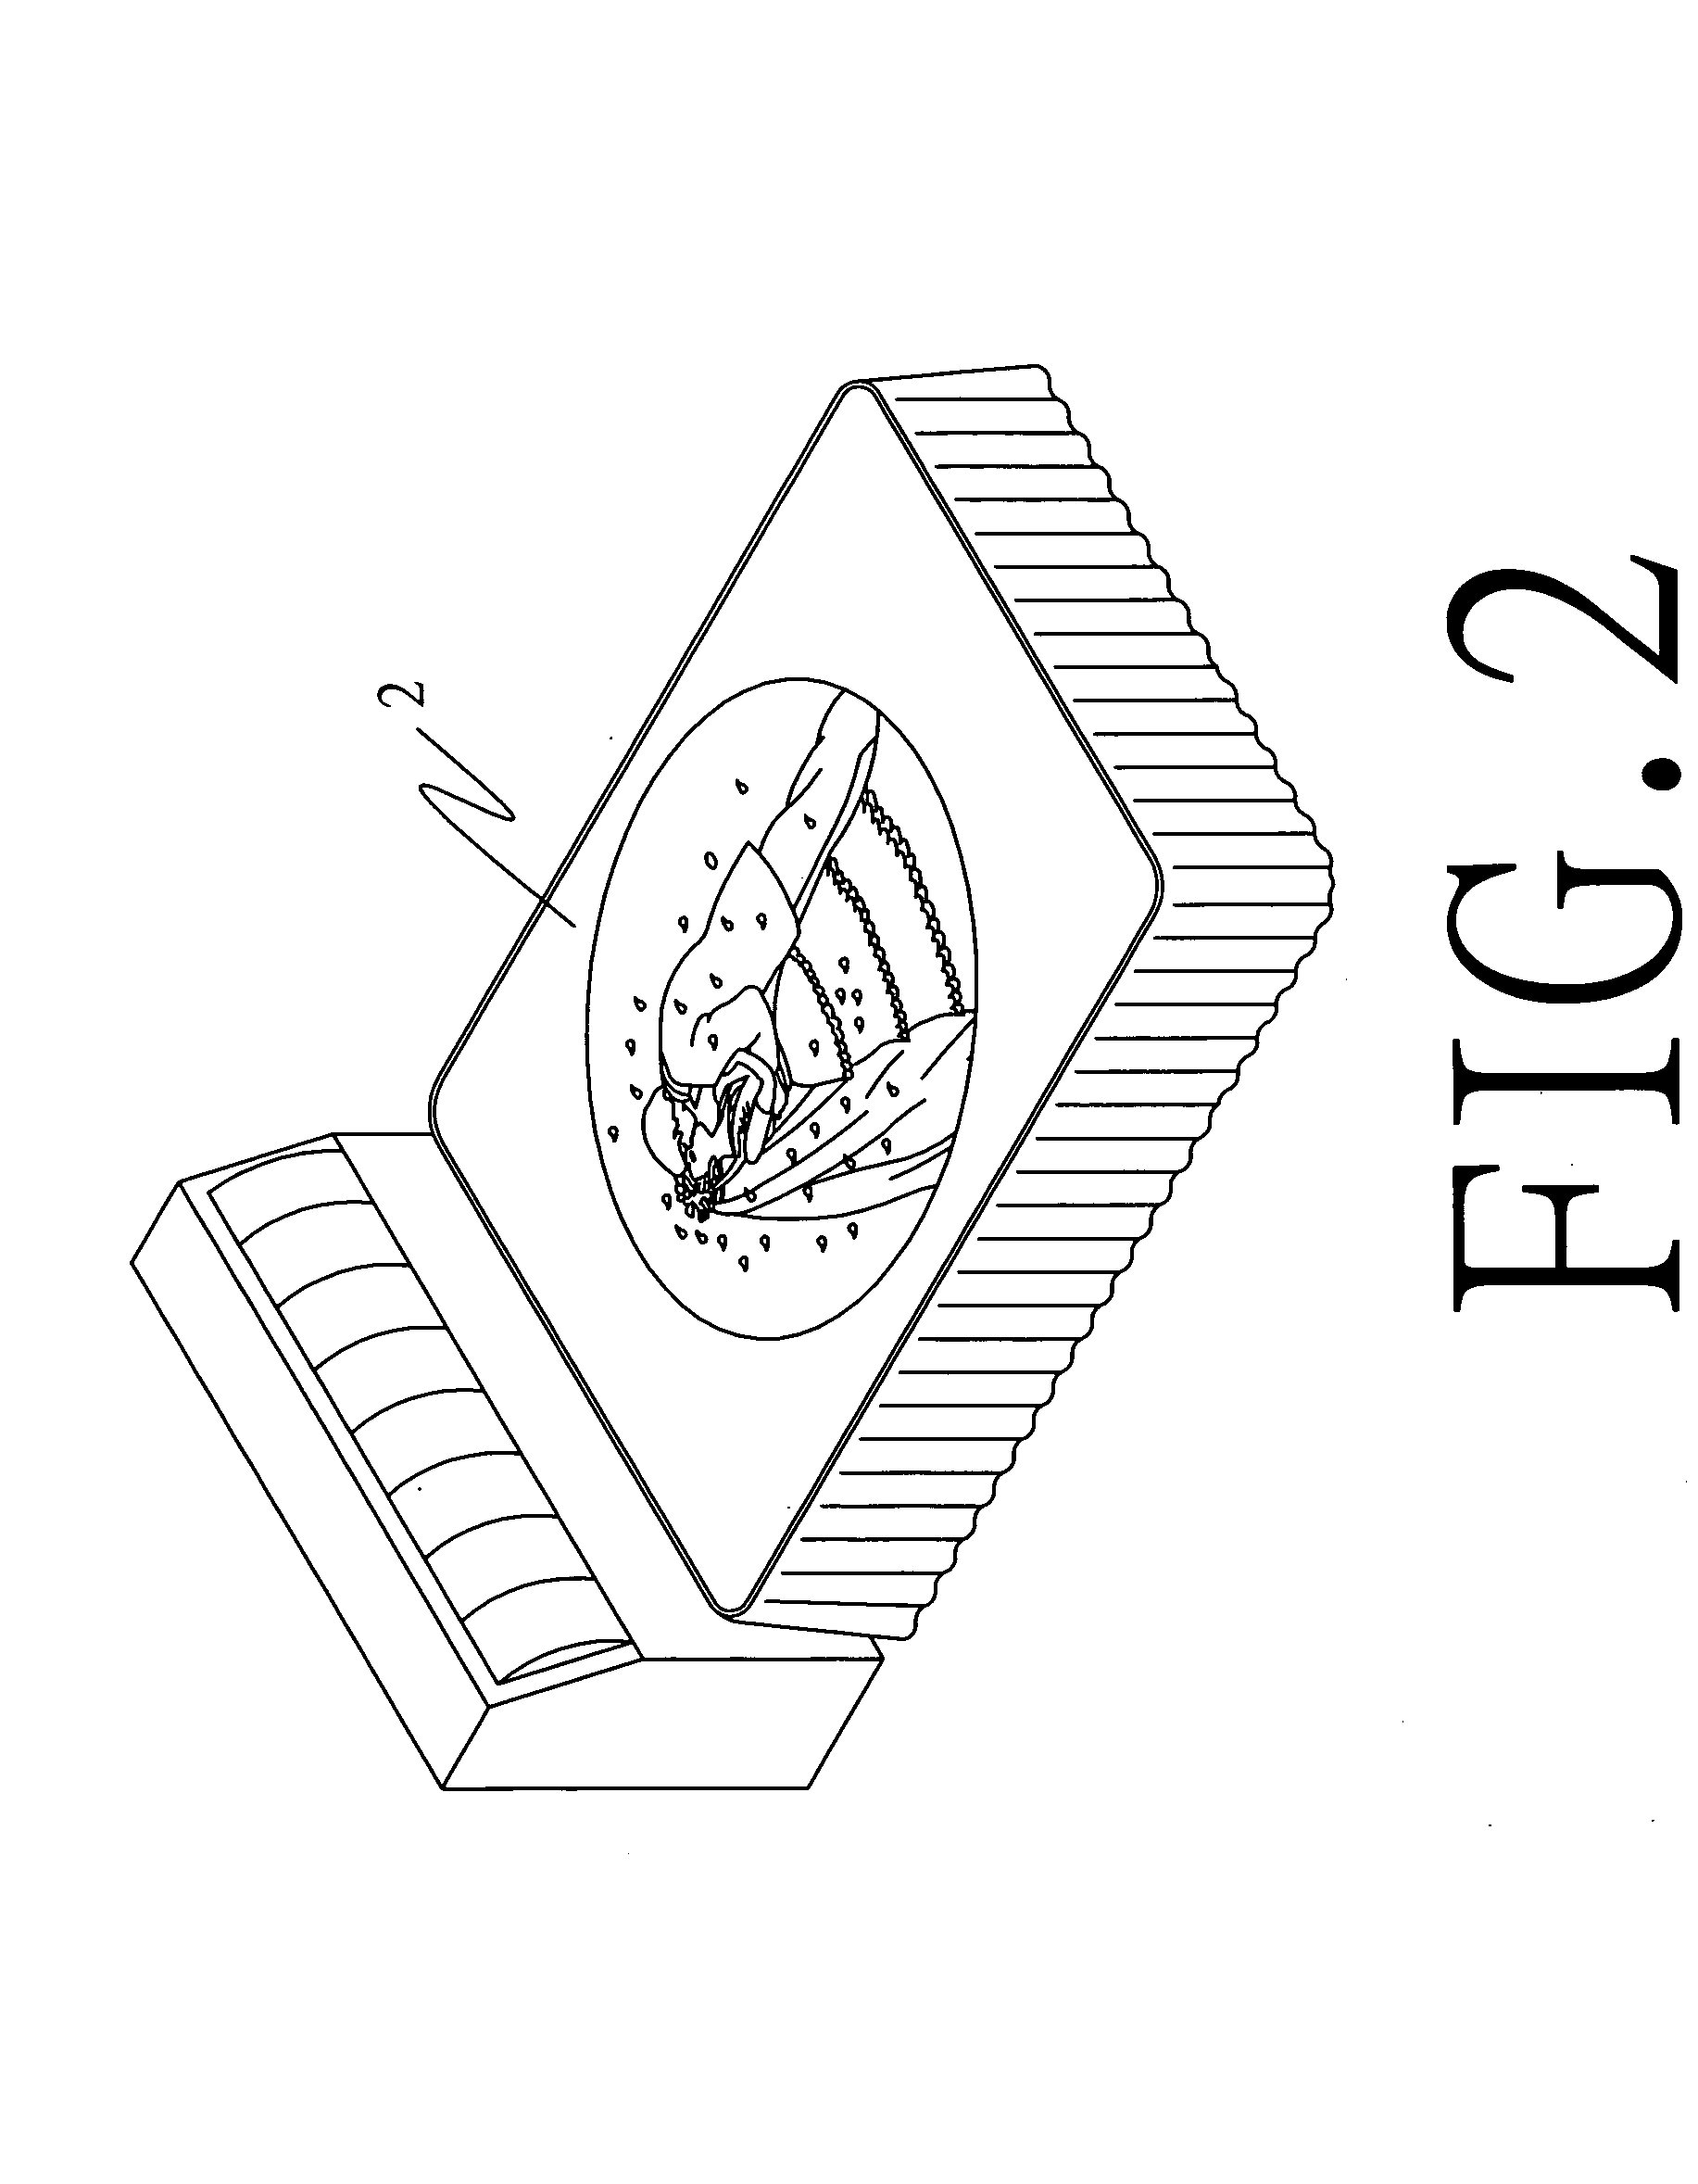 Method for printing images on textile fabric